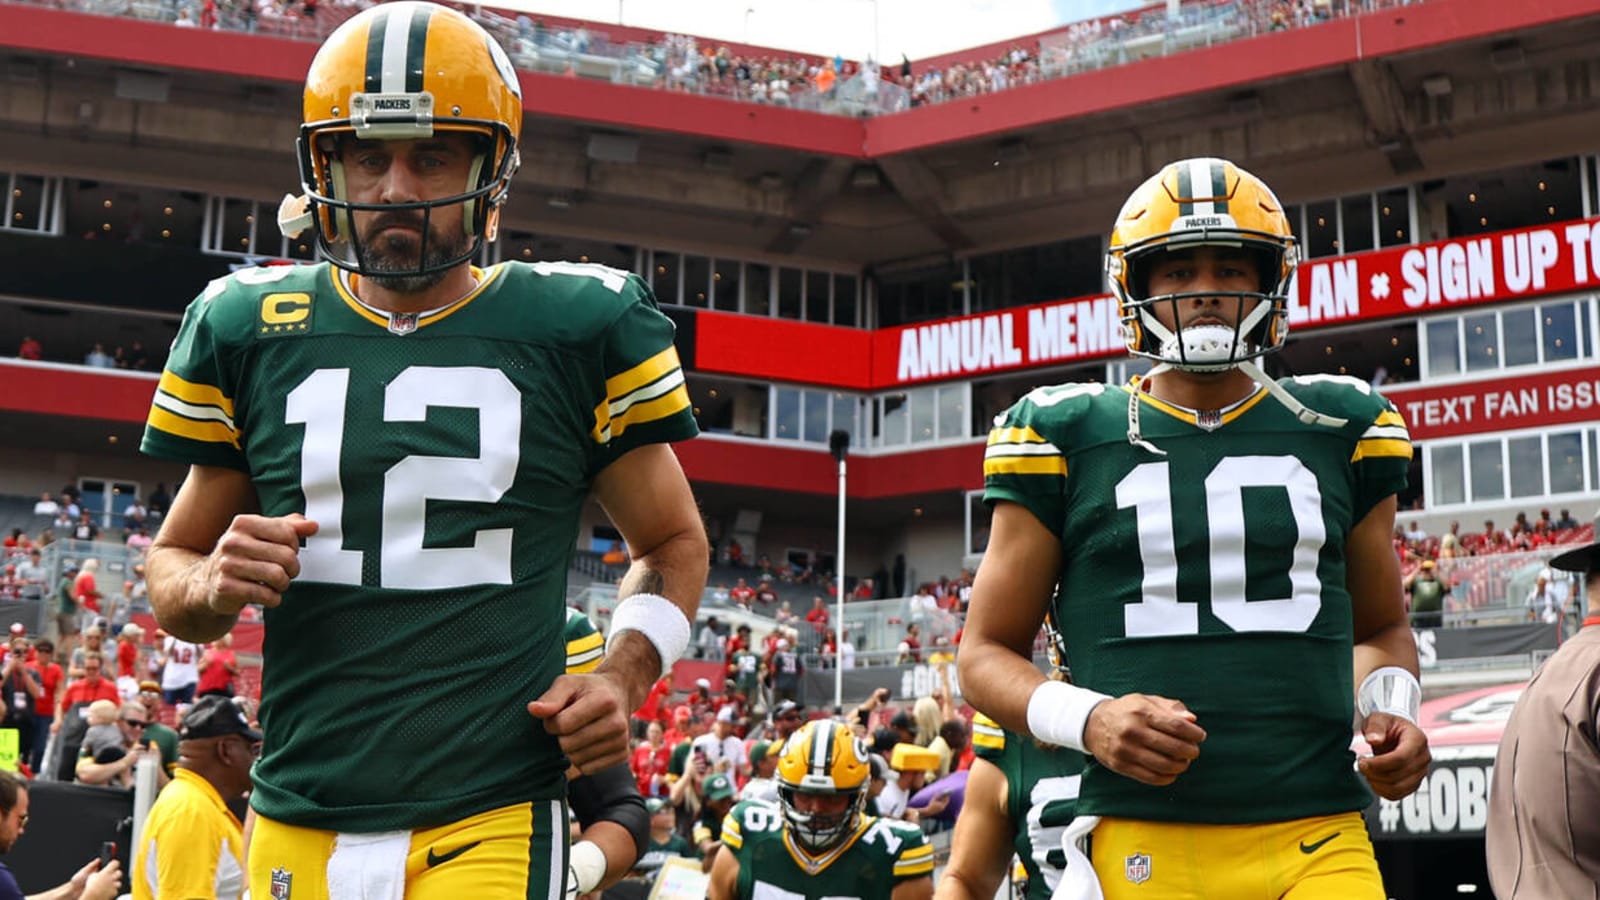 Why the Packers should consider benching Rodgers, starting Love